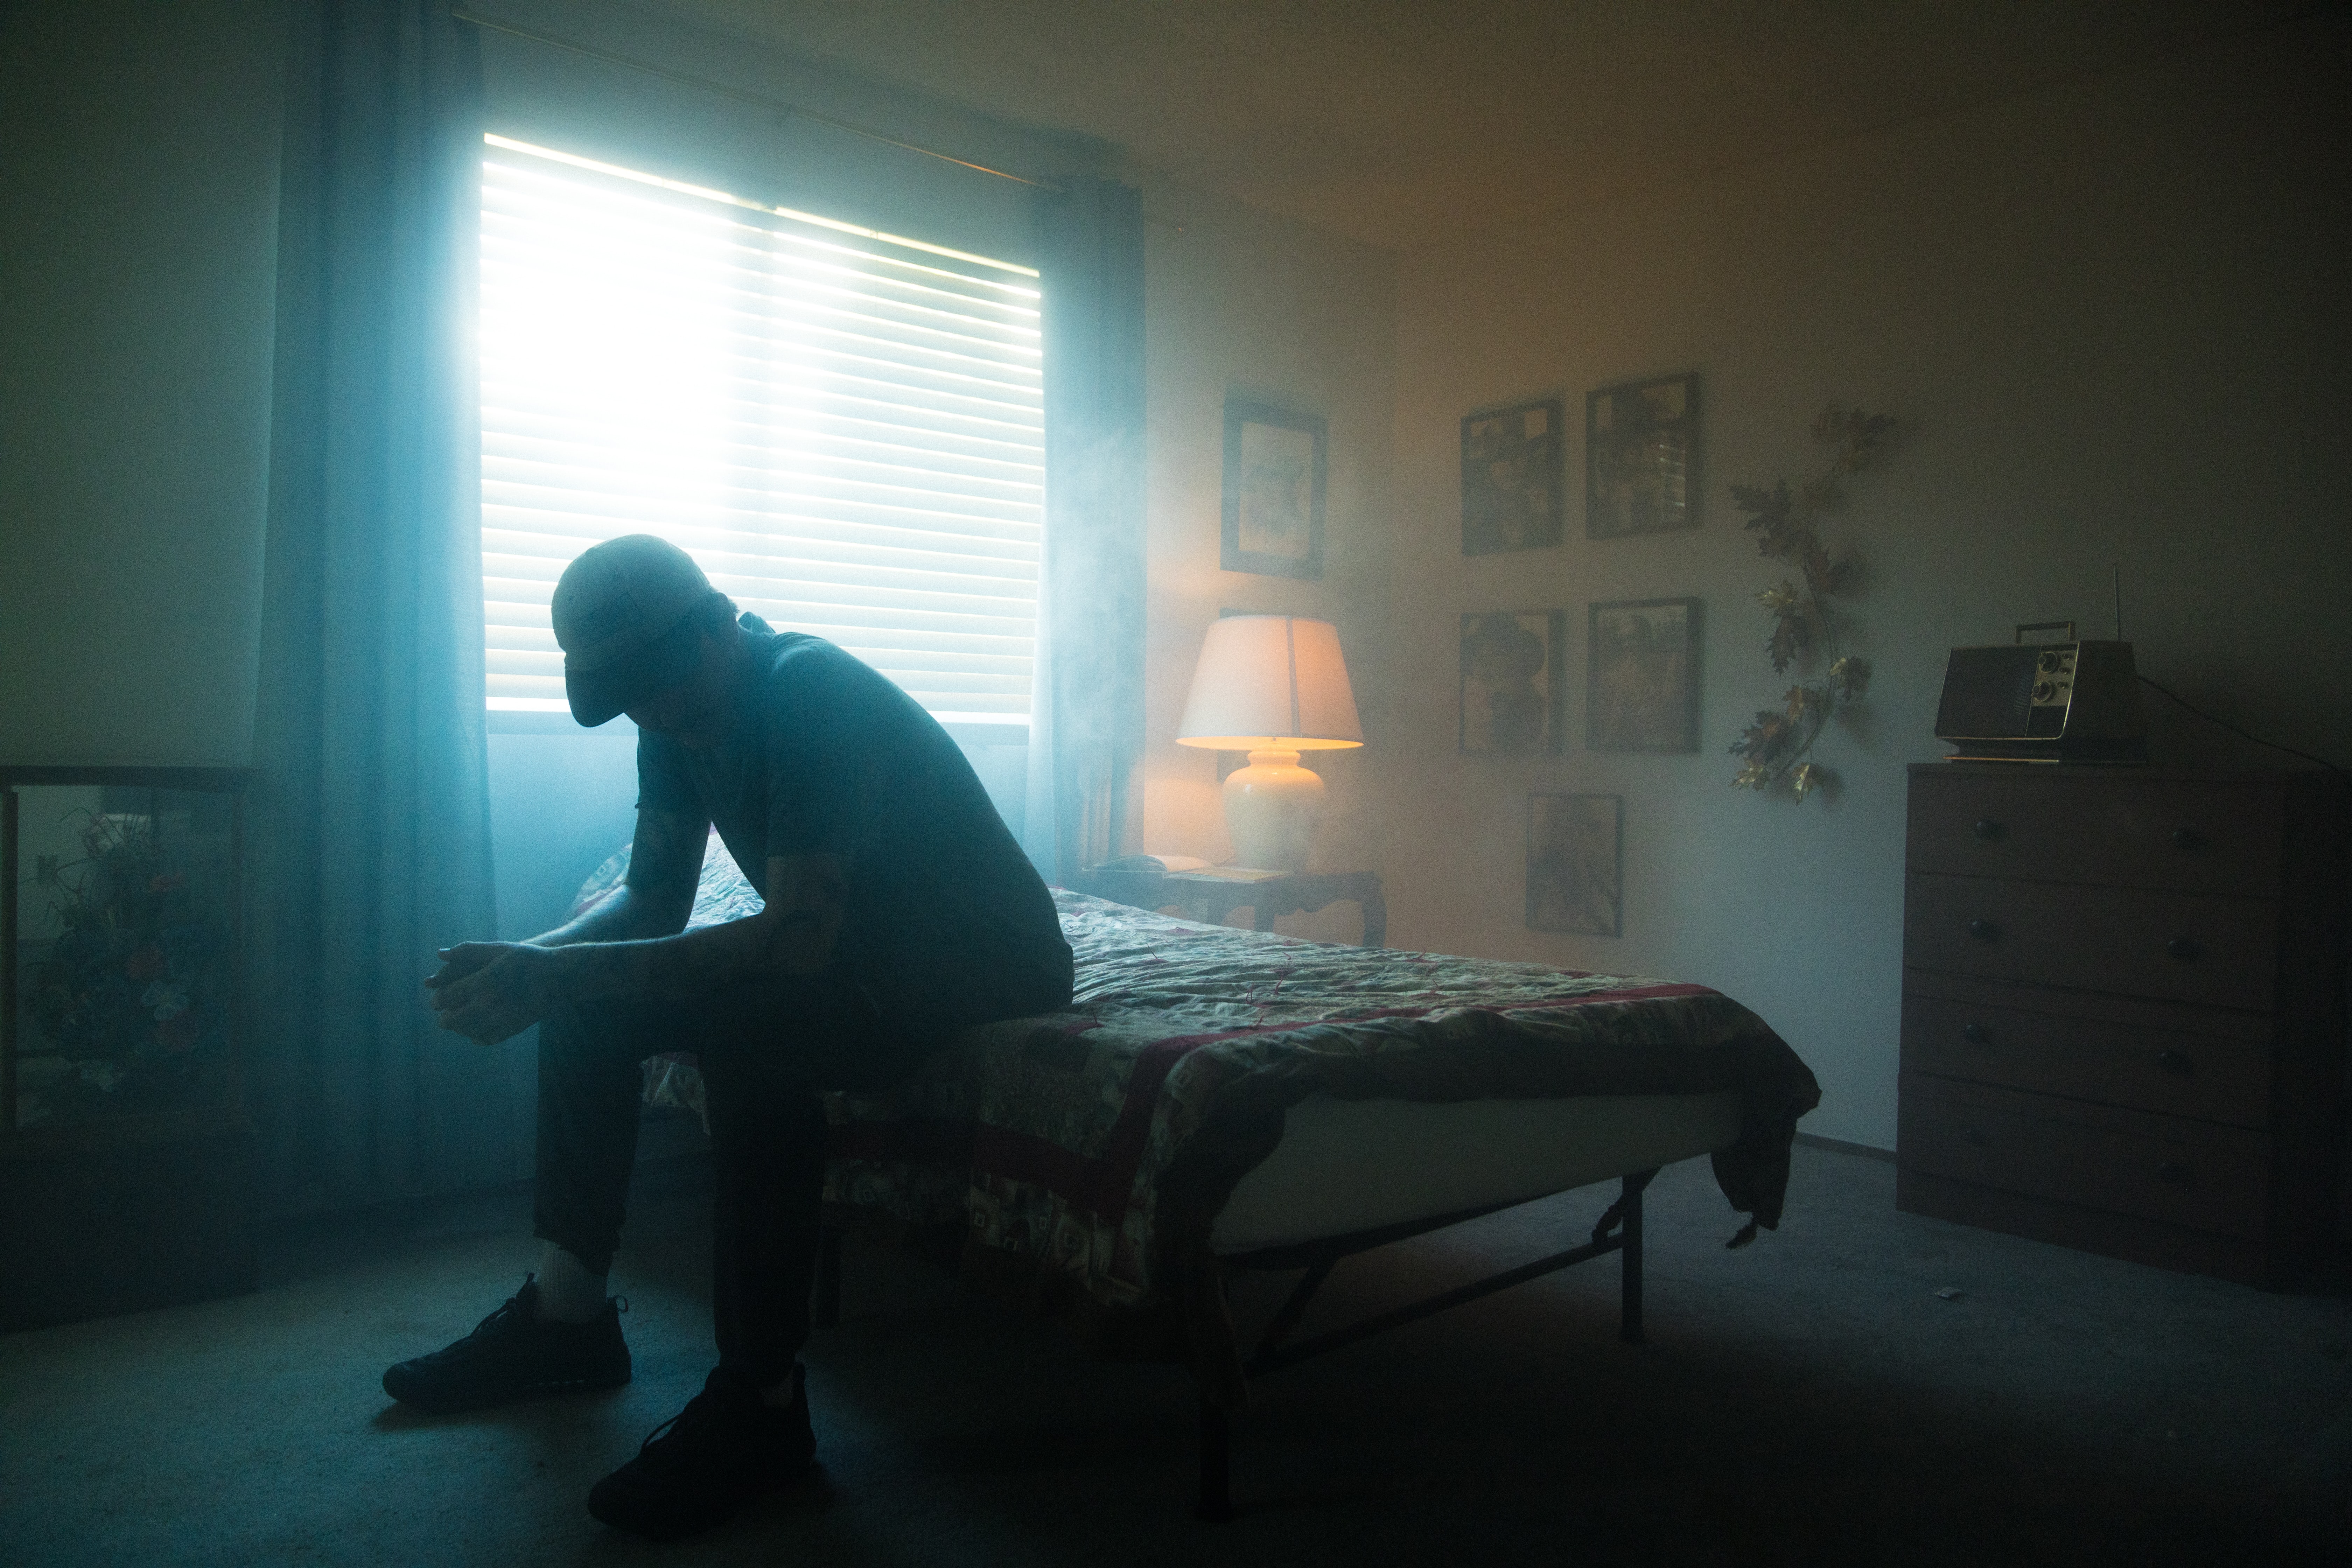 A man sits alone on his bed.